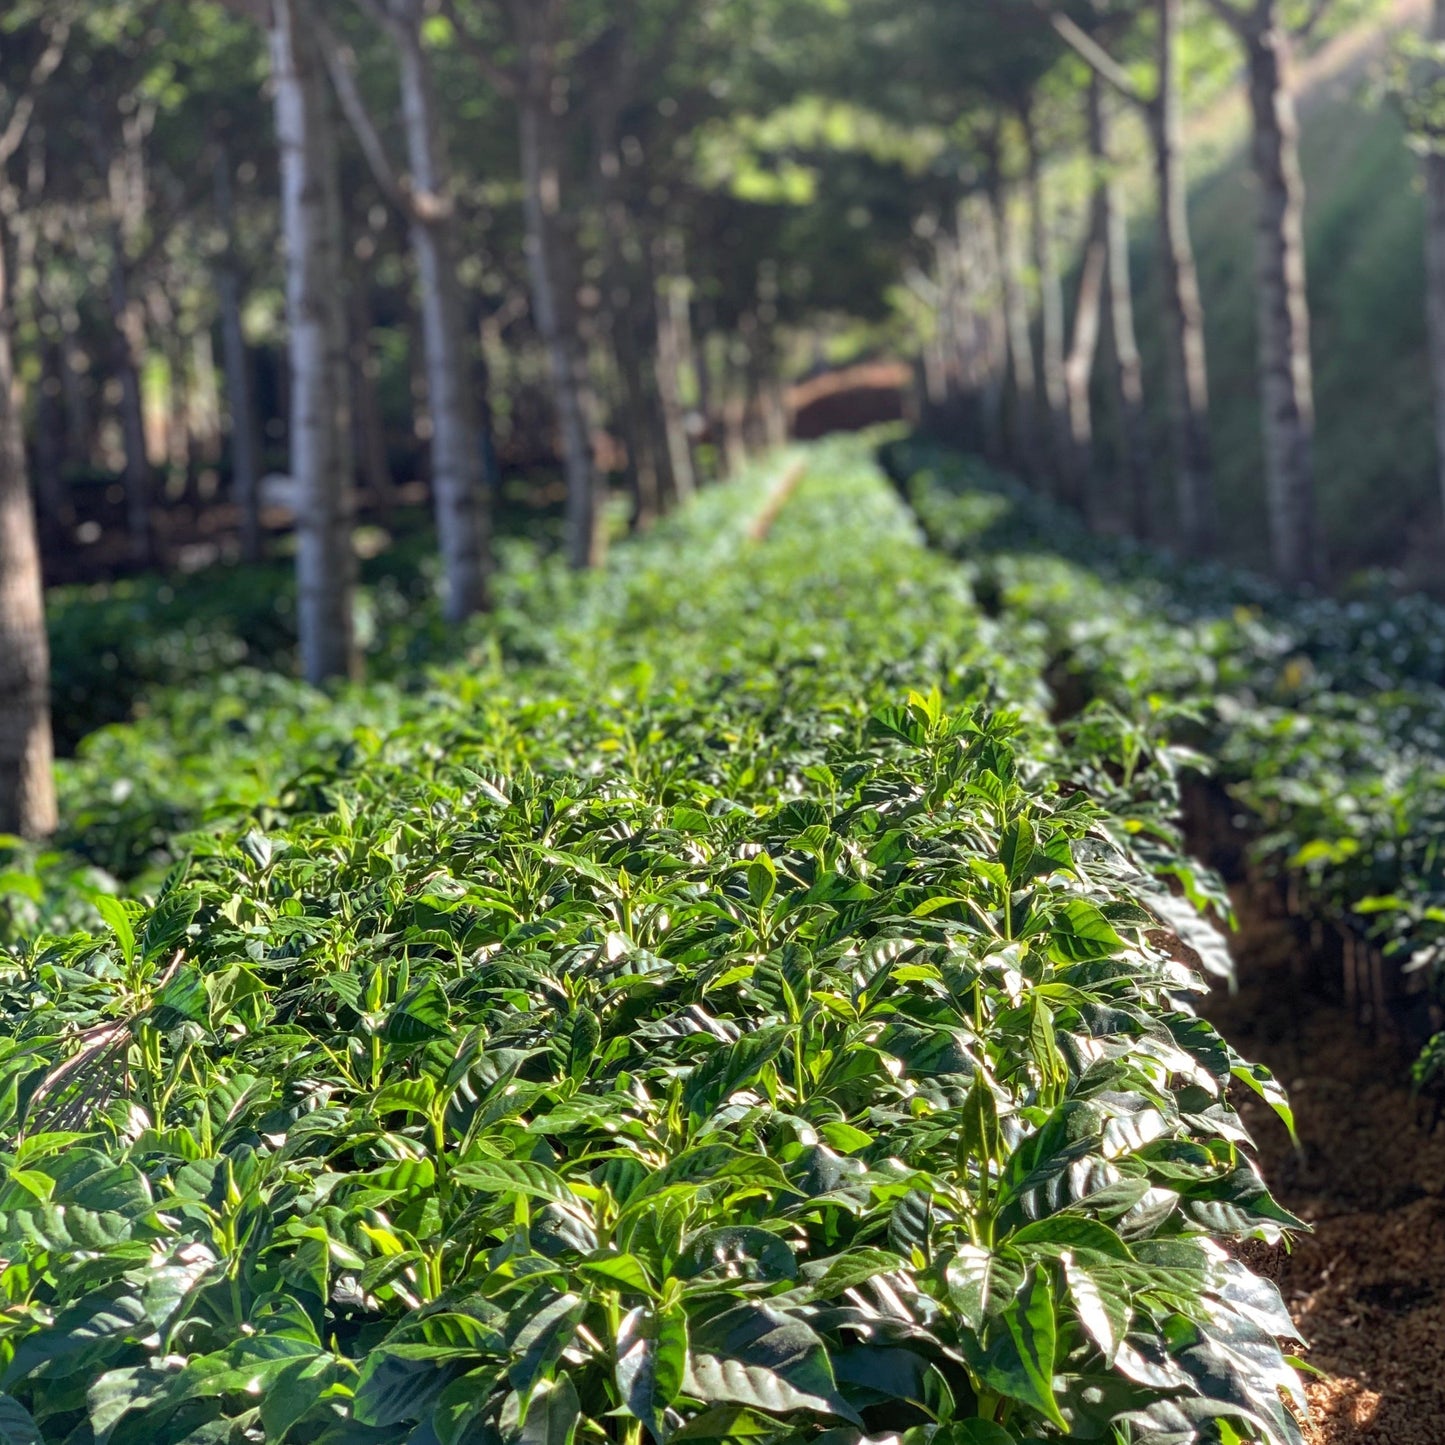 Young coffee plants in the nursery at Los Pirineos